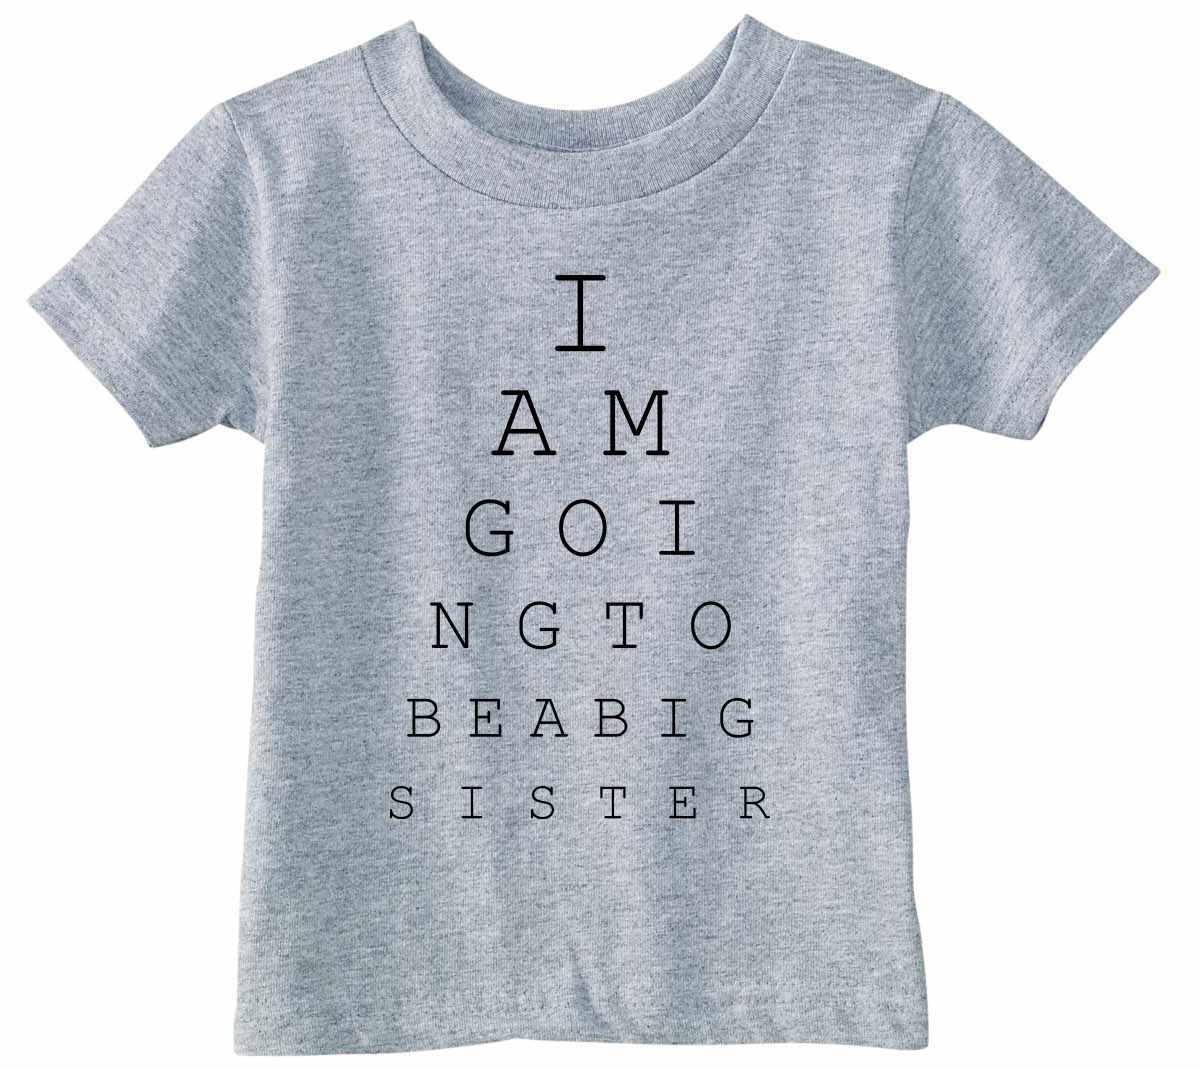 I AM GOING TO BE A BIG SISTER EYECHART Infant/Toddler  (#1160-7)